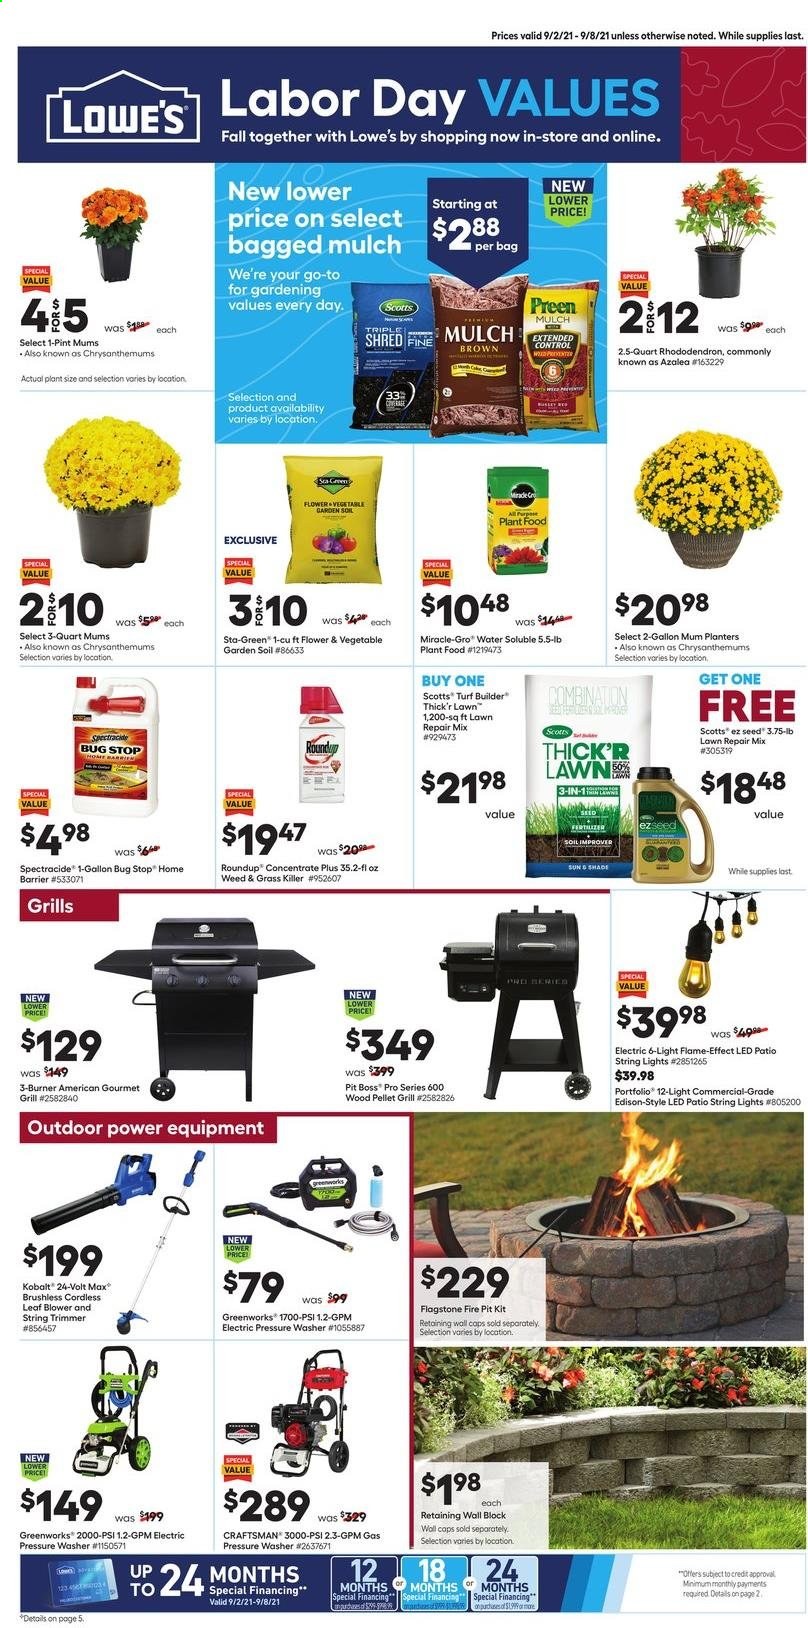 thumbnail - Lowe's Flyer - 09/02/2021 - 09/08/2021 - Sales products - Mum, bag, trimmer, gallon, plant seeds, cap, string lights, Craftsman, string trimmer, blower, electric pressure washer, pressure washer, grill, pellet grill, turf builder, garden soil, Roundup, garden mulch. Page 1.